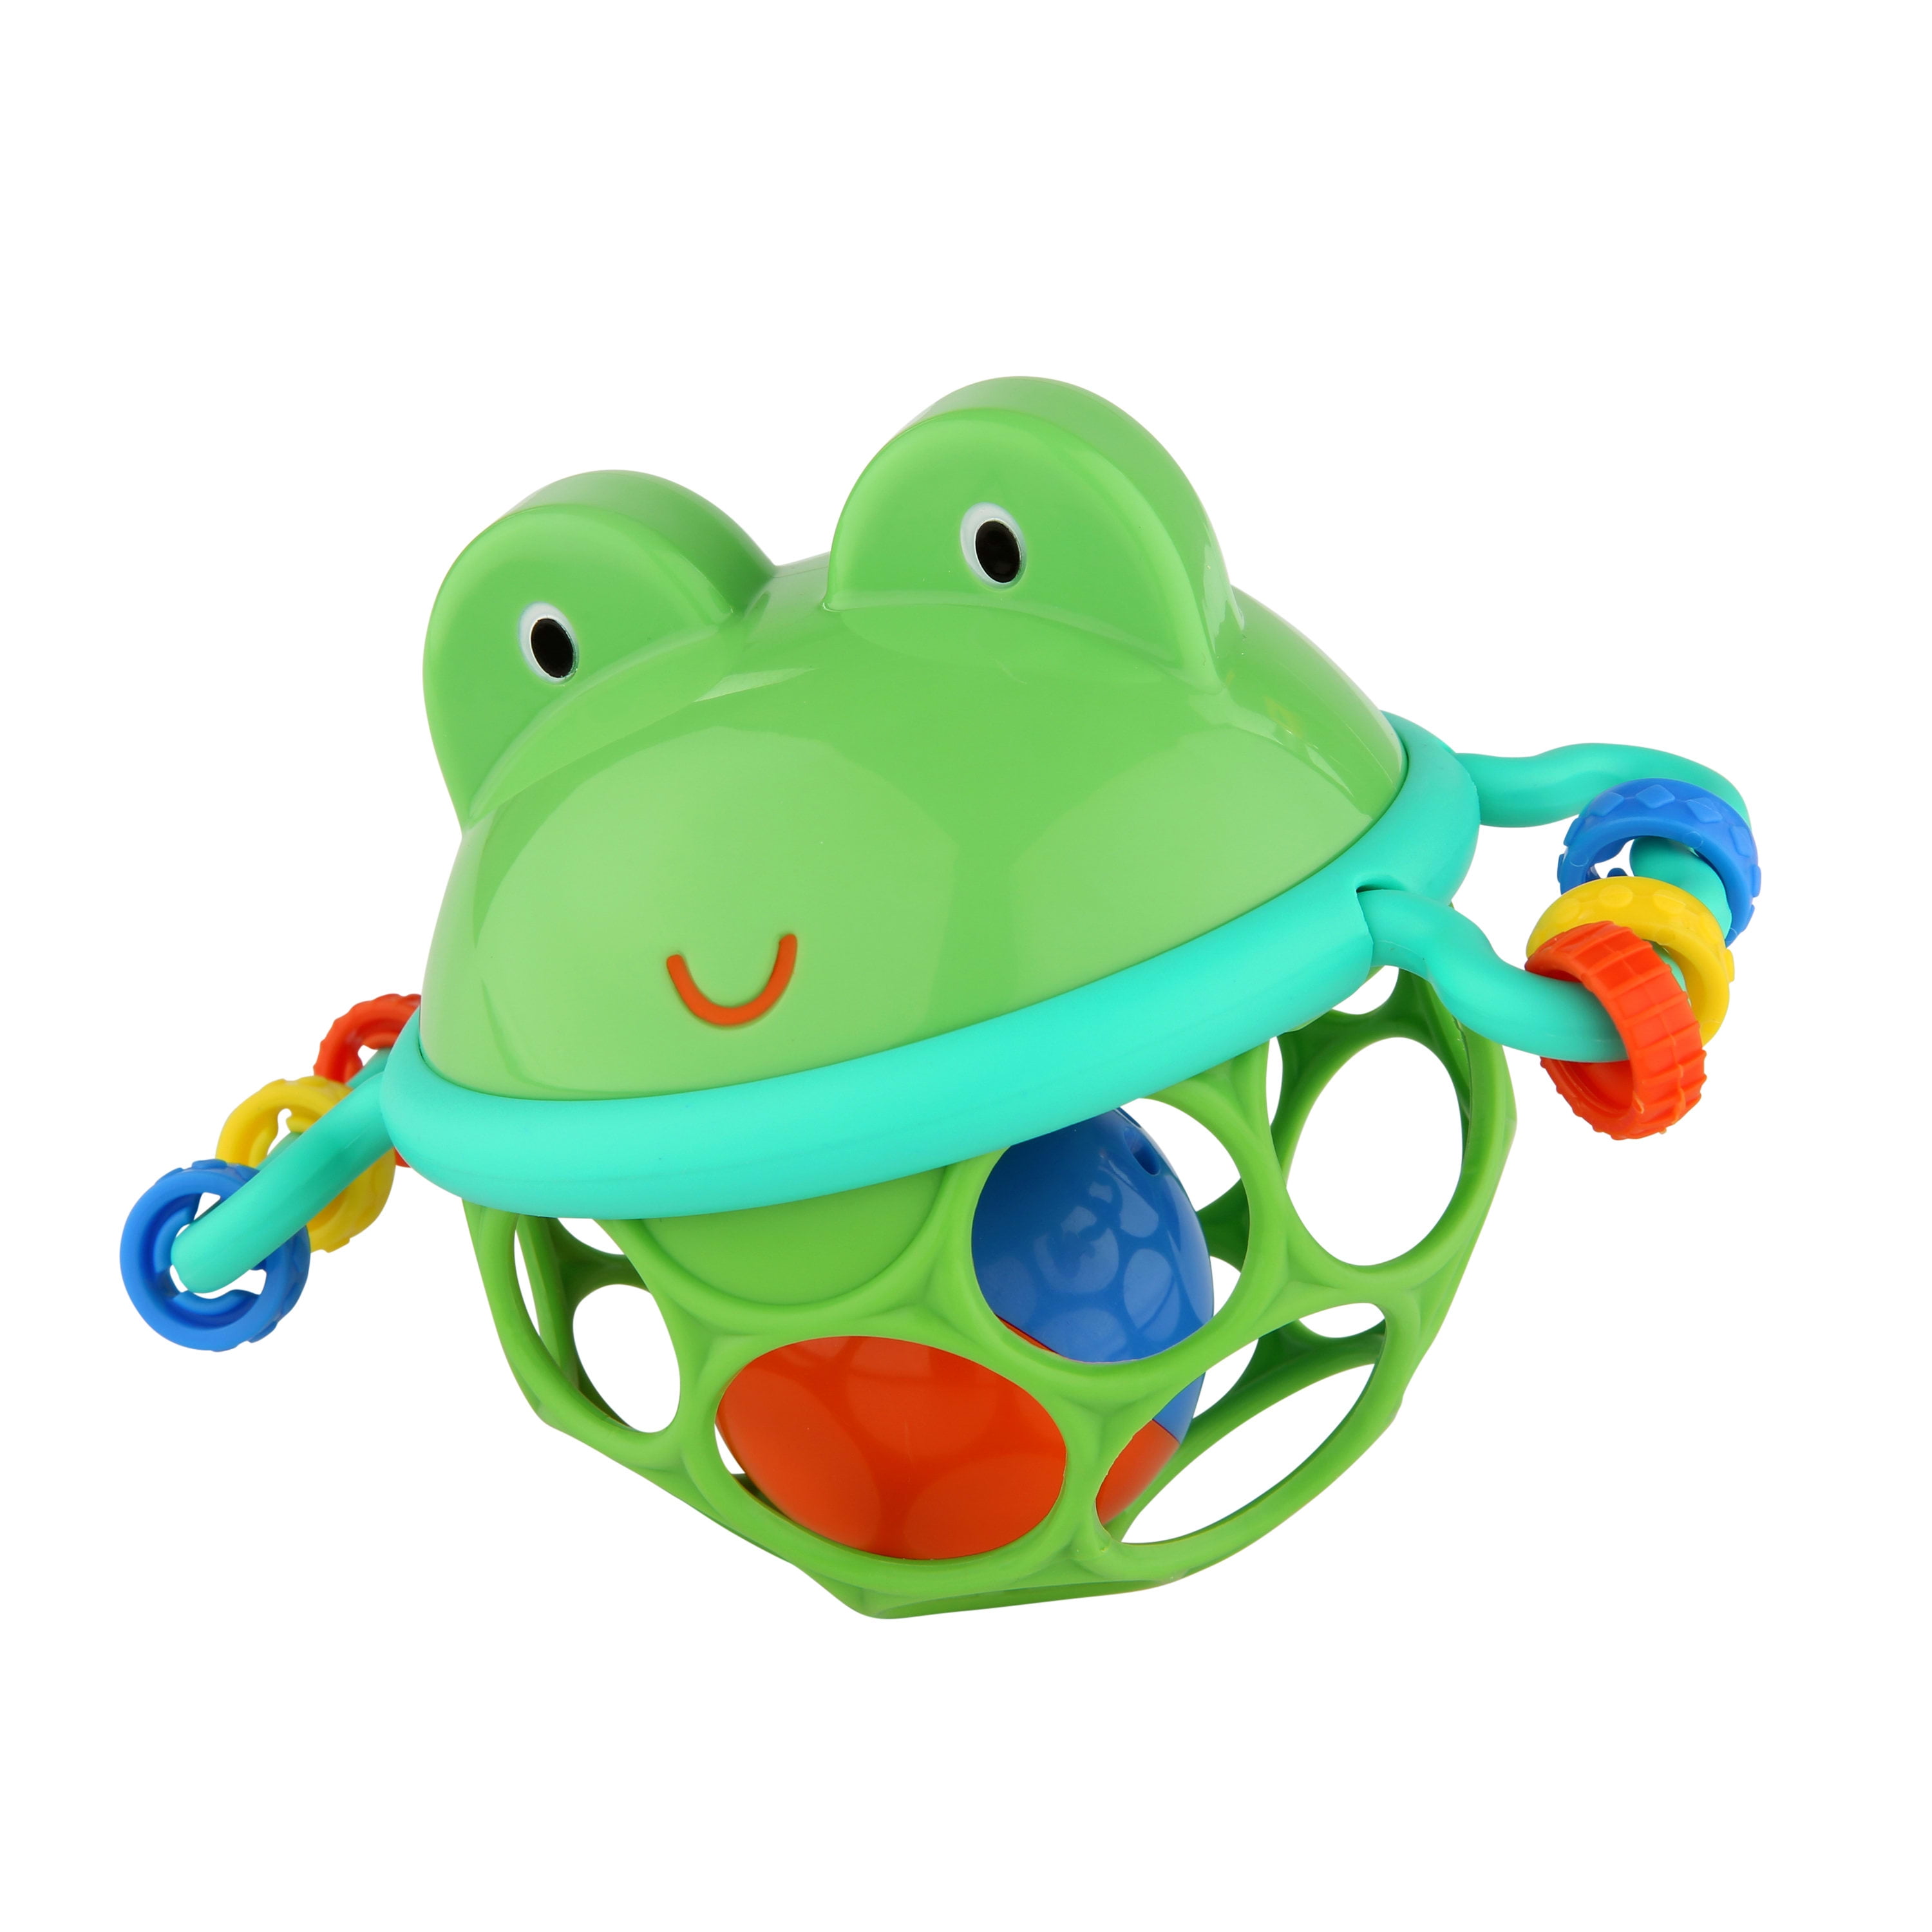 Wooden Wildlife Frog Cup And Ball Childrens Toy 